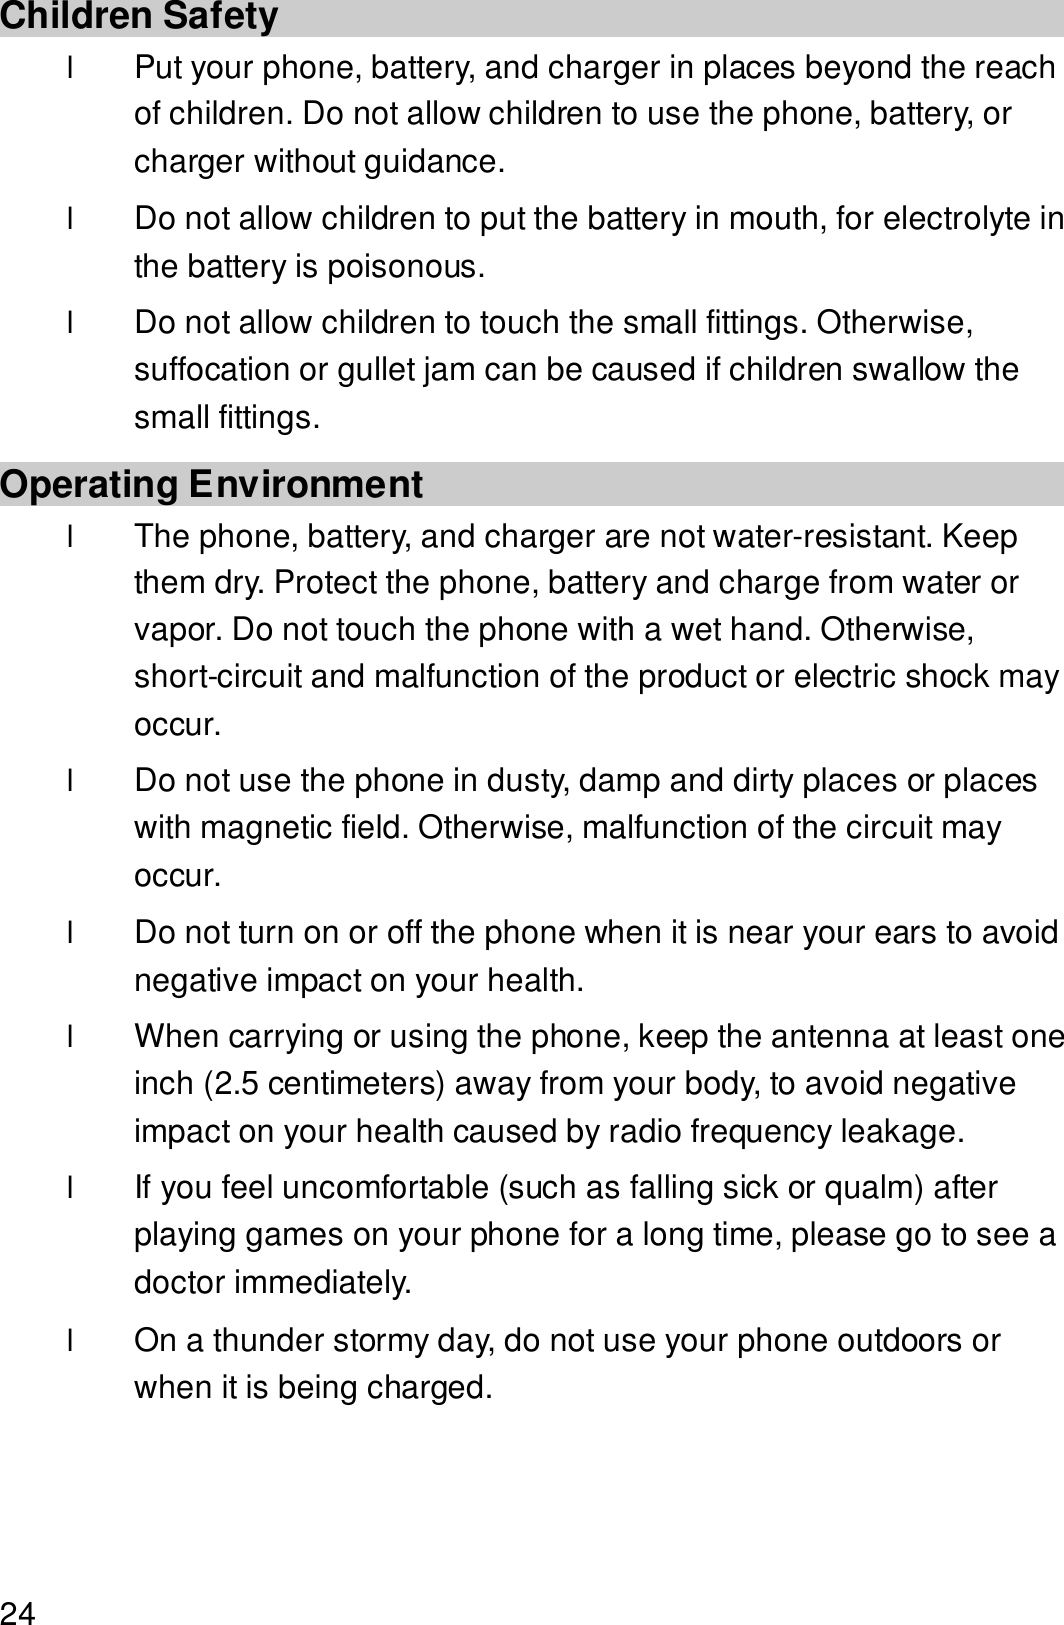  24 Children Safety l Put your phone, battery, and charger in places beyond the reach of children. Do not allow children to use the phone, battery, or charger without guidance. l Do not allow children to put the battery in mouth, for electrolyte in the battery is poisonous. l Do not allow children to touch the small fittings. Otherwise, suffocation or gullet jam can be caused if children swallow the small fittings. Operating Environment l The phone, battery, and charger are not water-resistant. Keep them dry. Protect the phone, battery and charge from water or vapor. Do not touch the phone with a wet hand. Otherwise, short-circuit and malfunction of the product or electric shock may occur. l Do not use the phone in dusty, damp and dirty places or places with magnetic field. Otherwise, malfunction of the circuit may occur. l Do not turn on or off the phone when it is near your ears to avoid negative impact on your health. l When carrying or using the phone, keep the antenna at least one inch (2.5 centimeters) away from your body, to avoid negative impact on your health caused by radio frequency leakage. l If you feel uncomfortable (such as falling sick or qualm) after playing games on your phone for a long time, please go to see a doctor immediately. l On a thunder stormy day, do not use your phone outdoors or when it is being charged. 